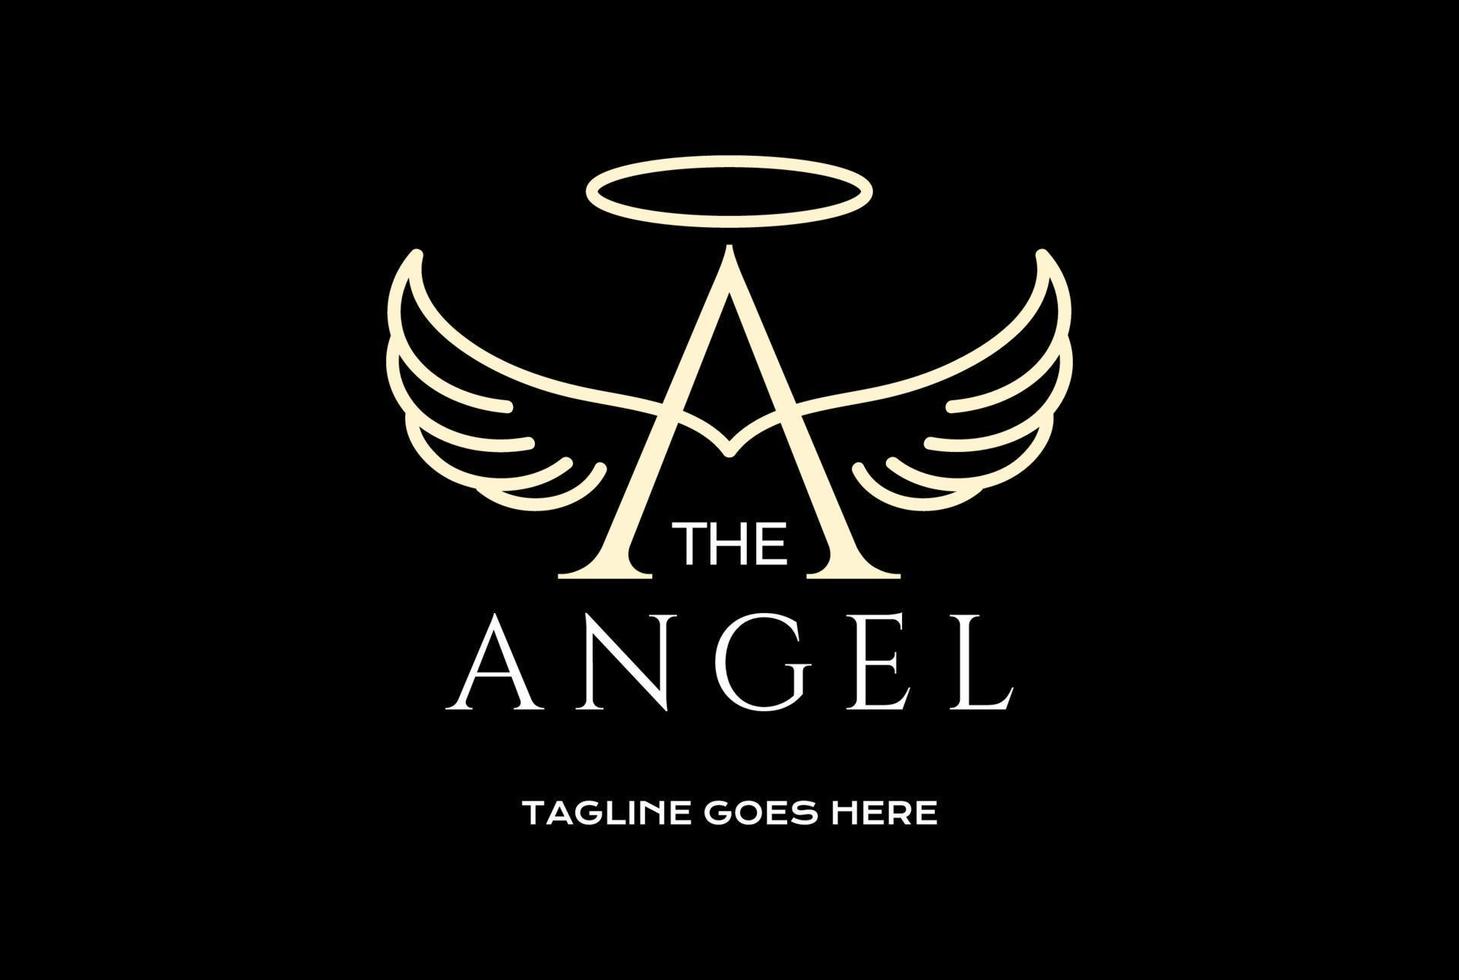 Golden Initial Letter A with Wings for Angel Logo Design Vector